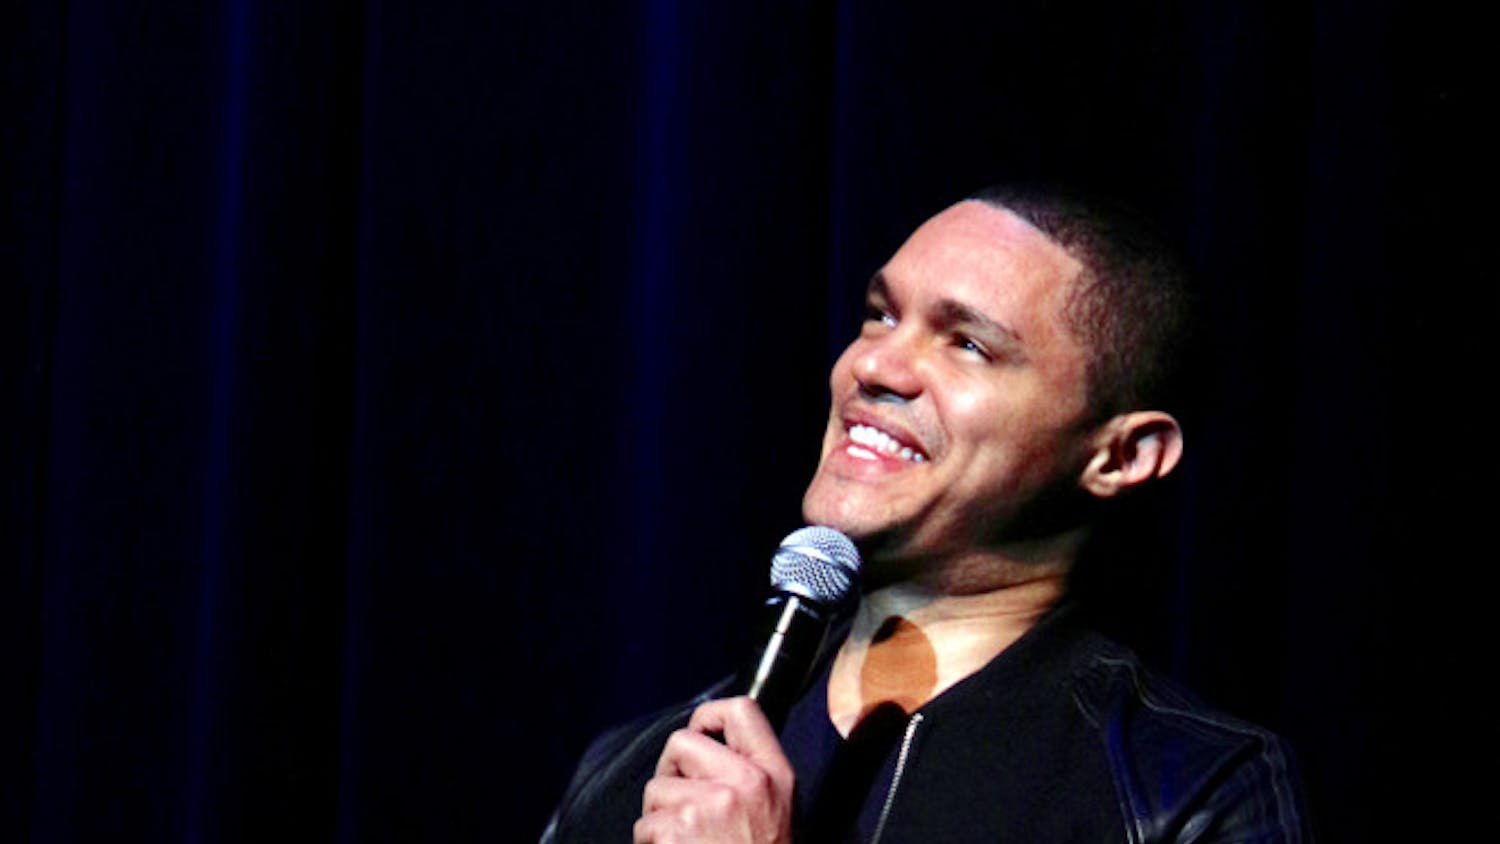 Trevor Noah, the host of Comedy Central’s “The Daily Show,” performs at the Phillips Center for the Performing Arts on Wednesday night.